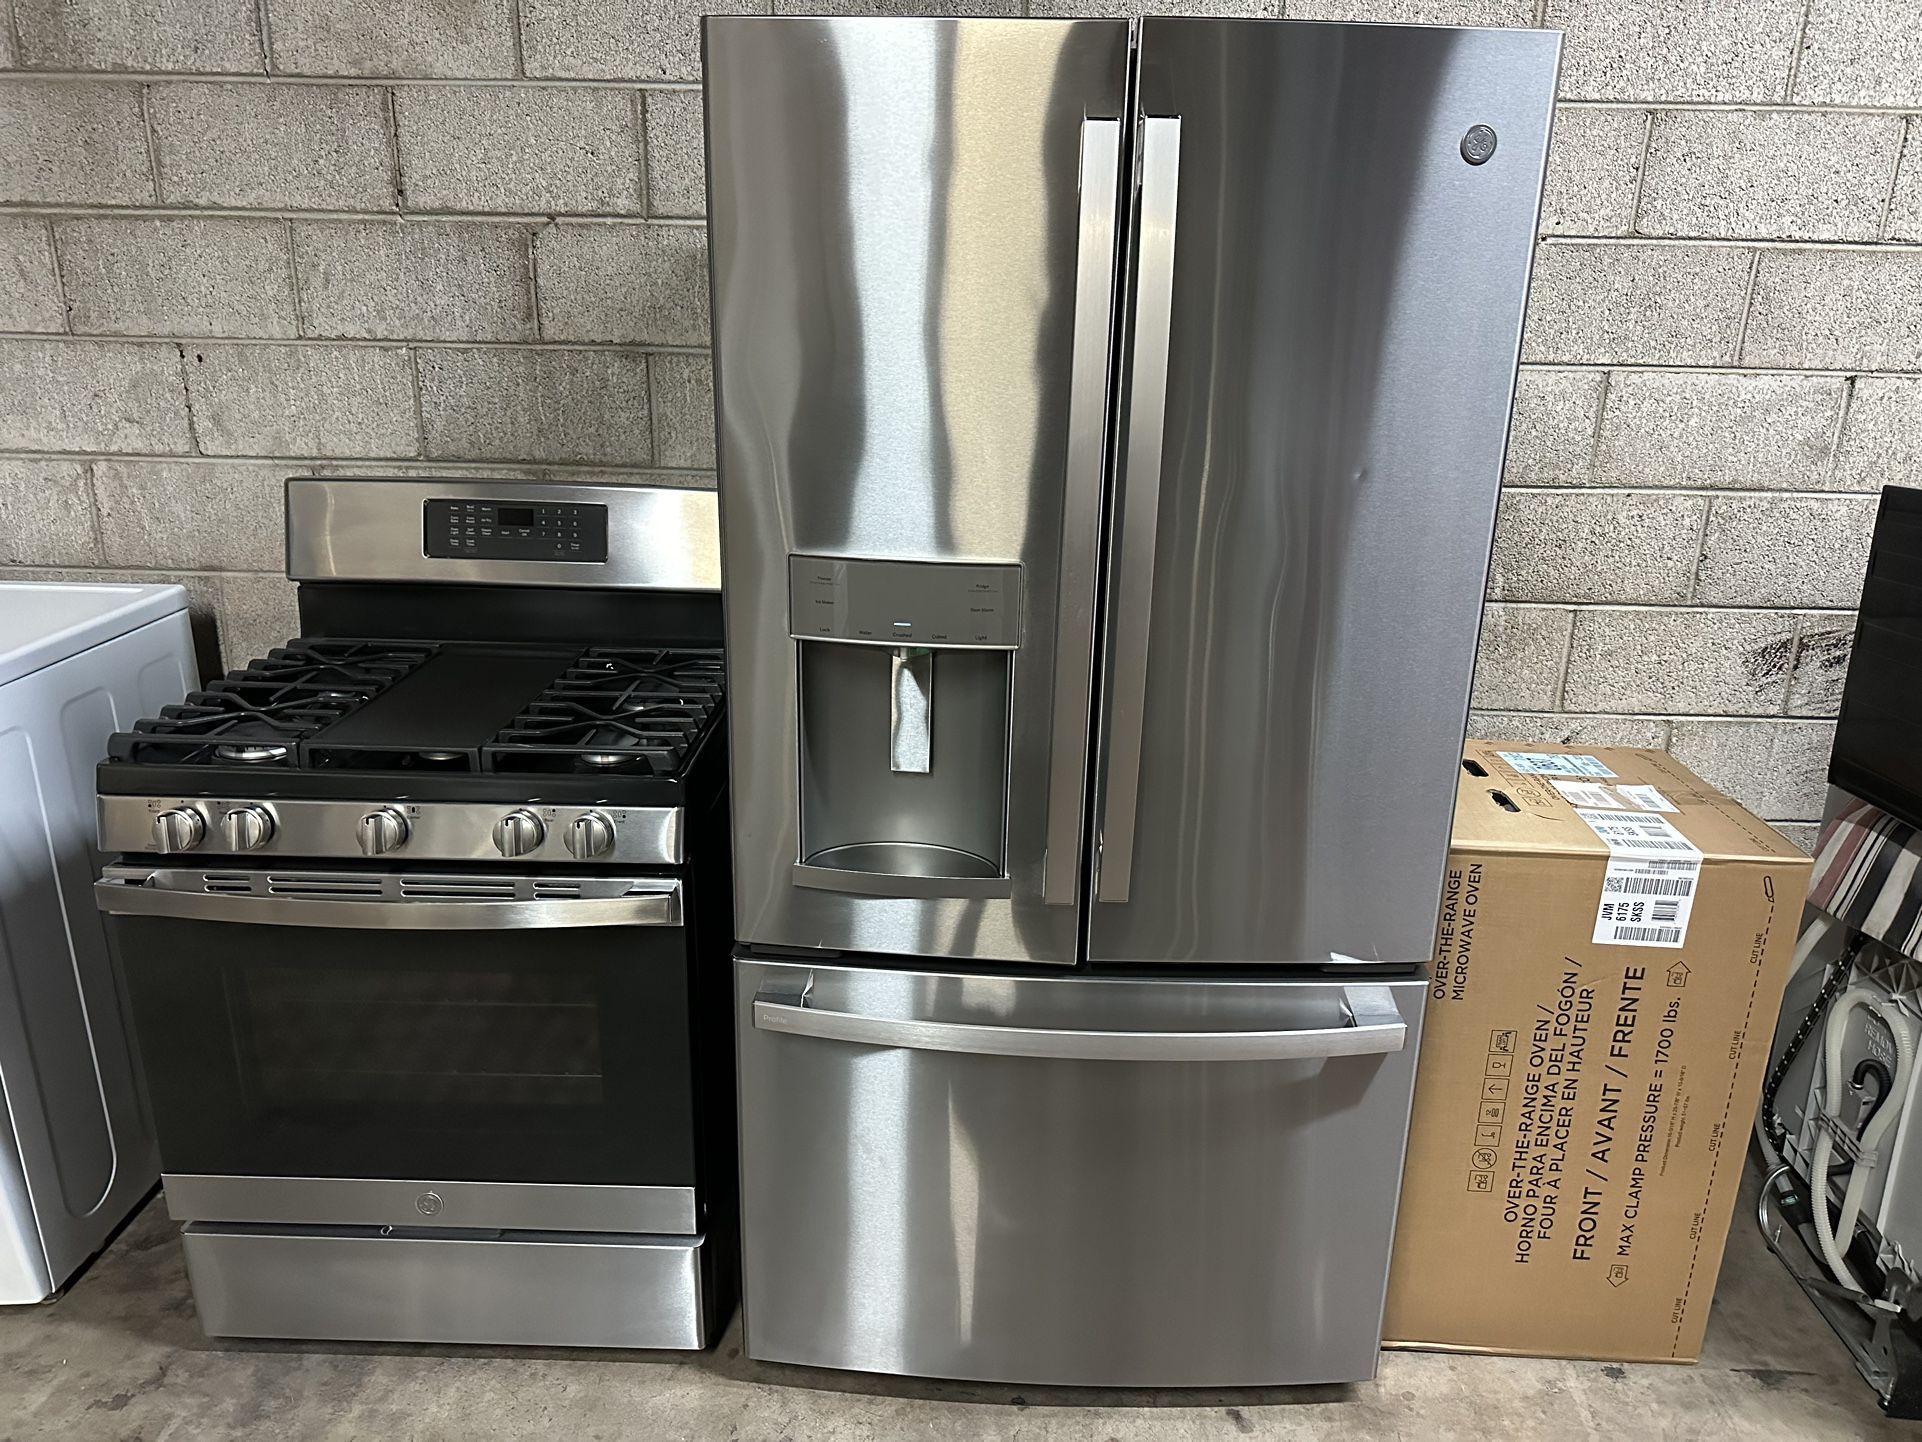 VERY NICE  GE KITCHEN APPLIANCES  SET EXCELLENT CONDITIONS LIKE NEW 